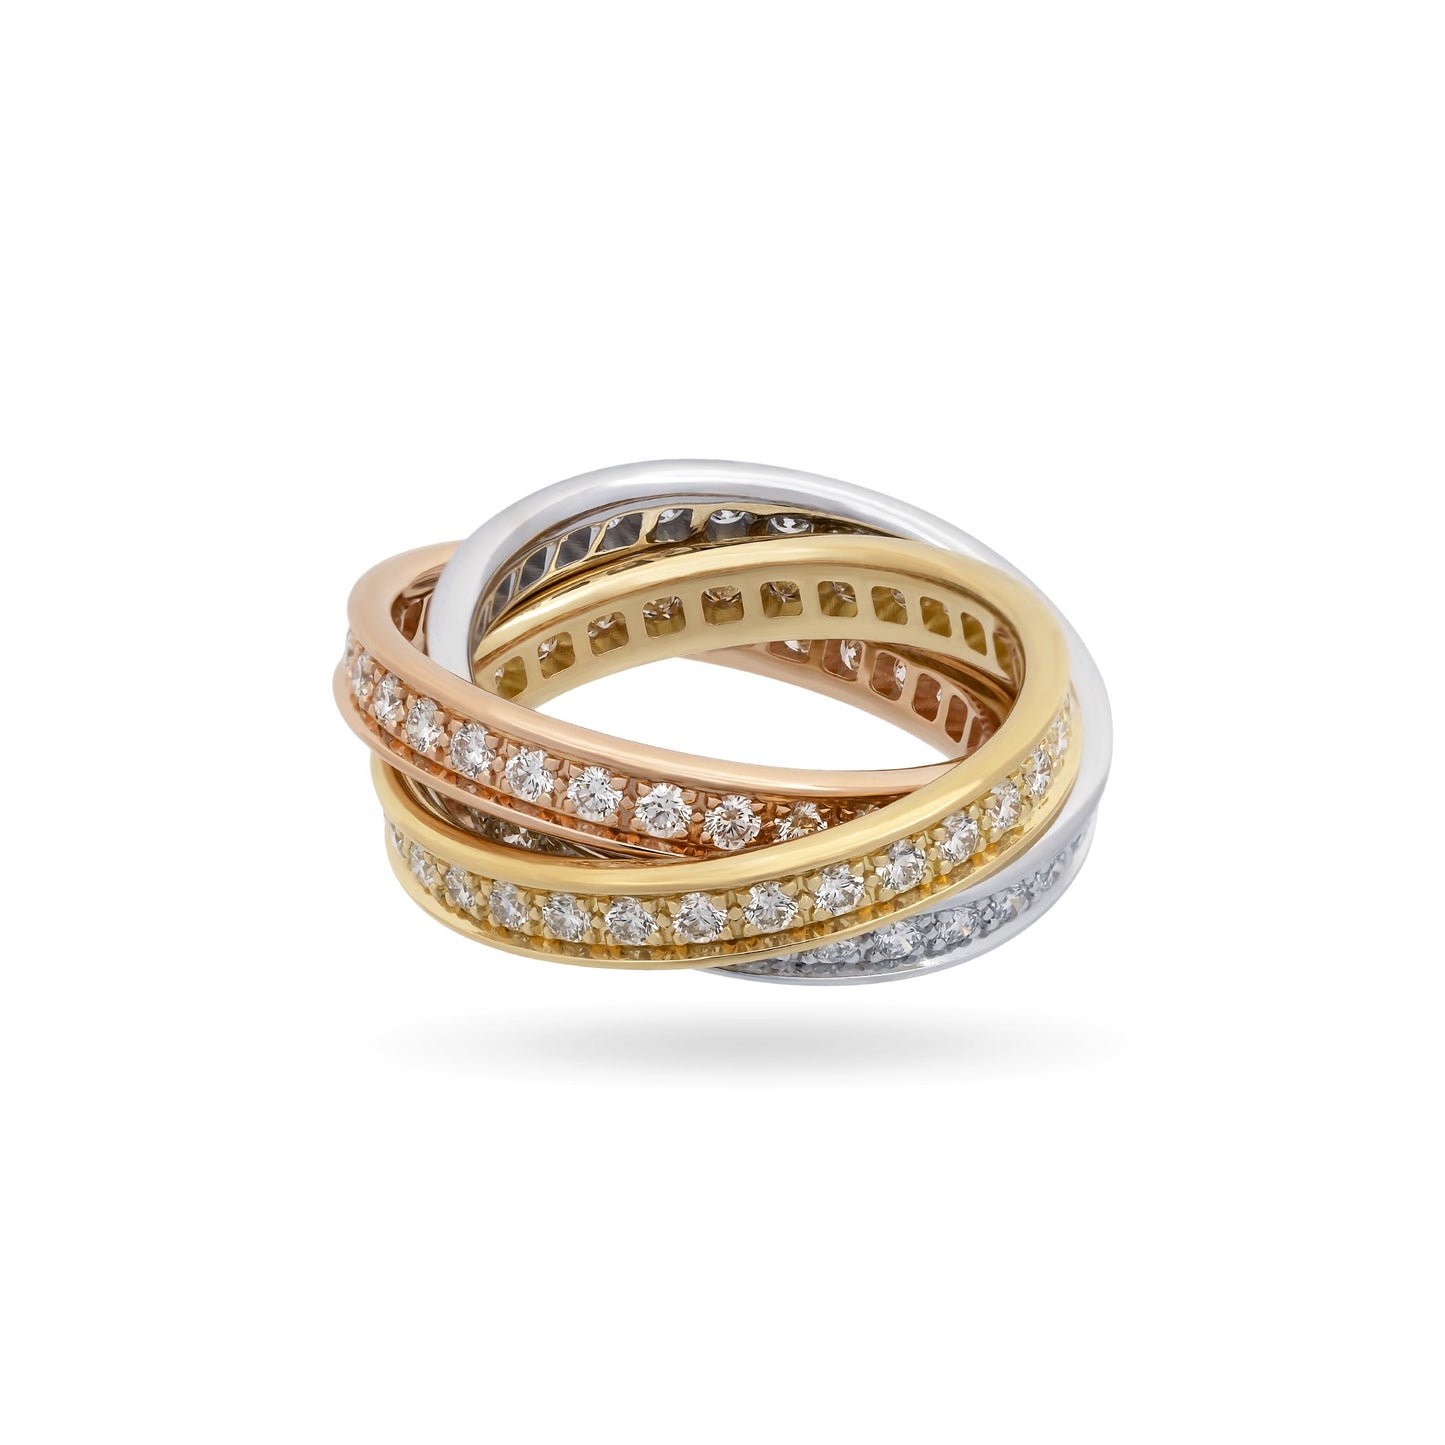 Cartier 18K White, Yellow and Rose Gold Diamond Trinity Ring Size: 5